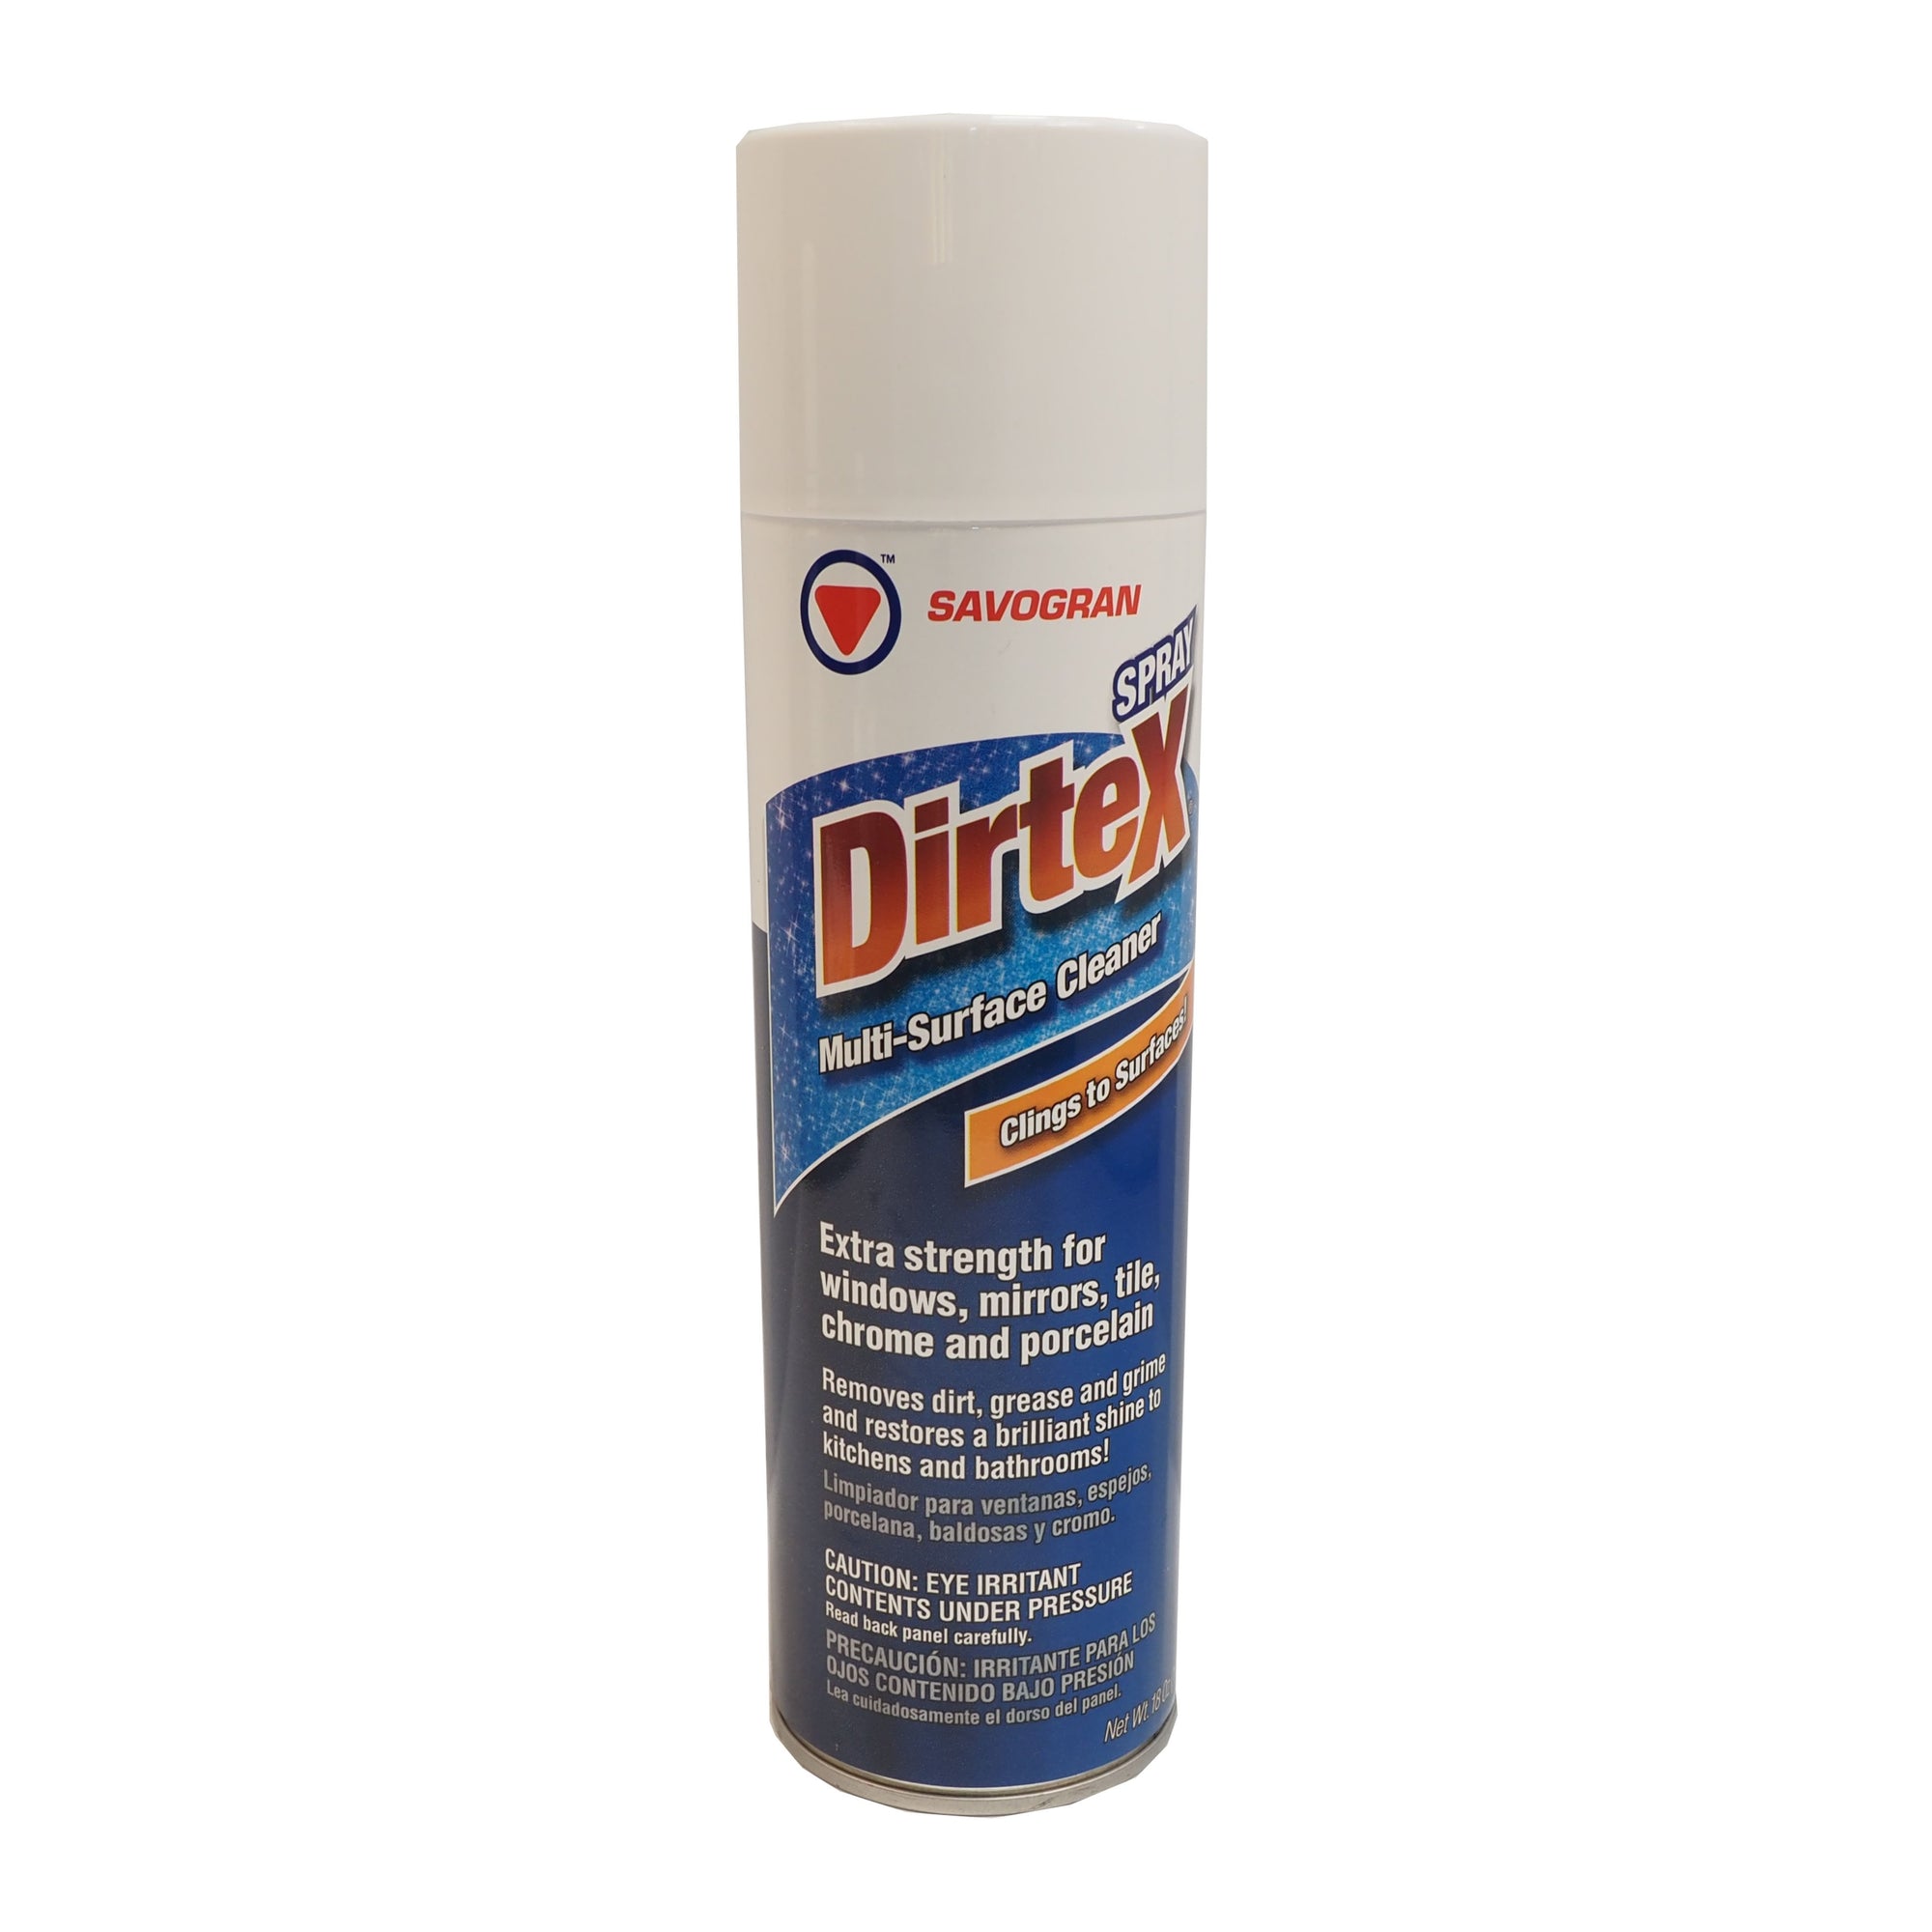 Dirtex Cleaner, available at Catalina Paints in Los Angeles County, CA.